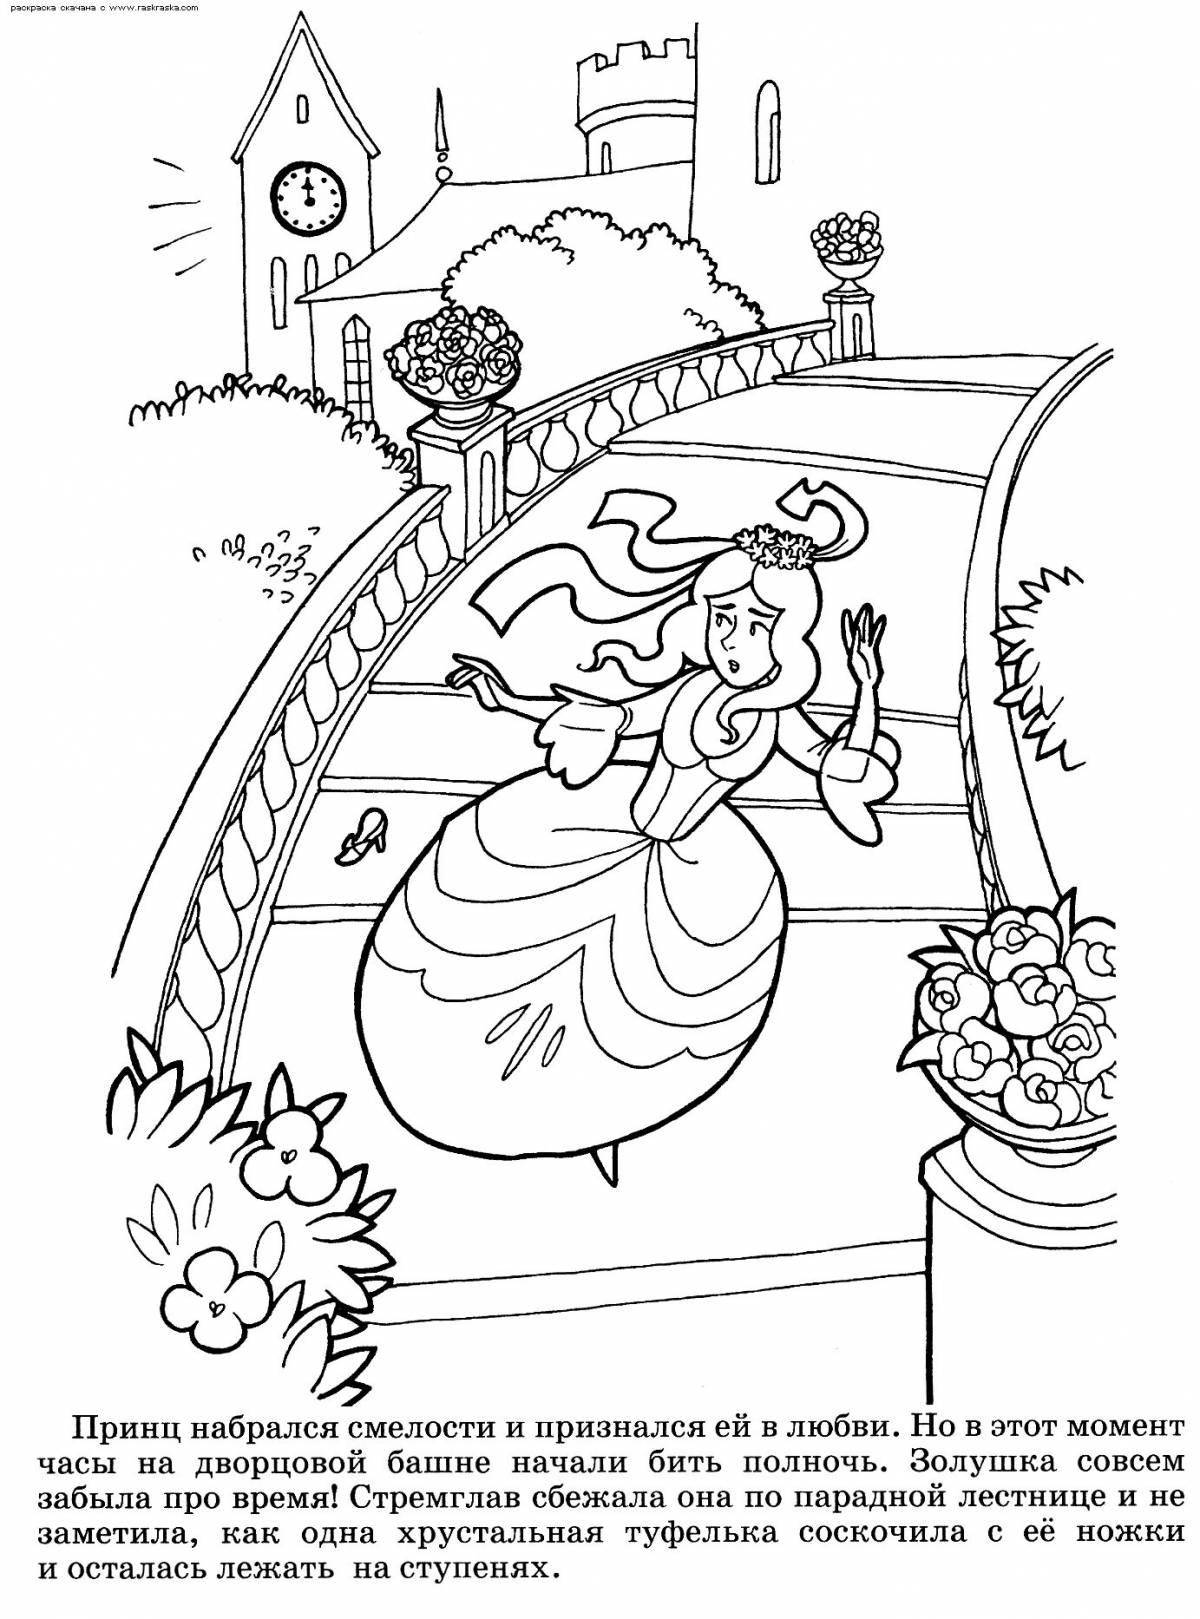 Delightful Cinderella and Charles Perrault coloring